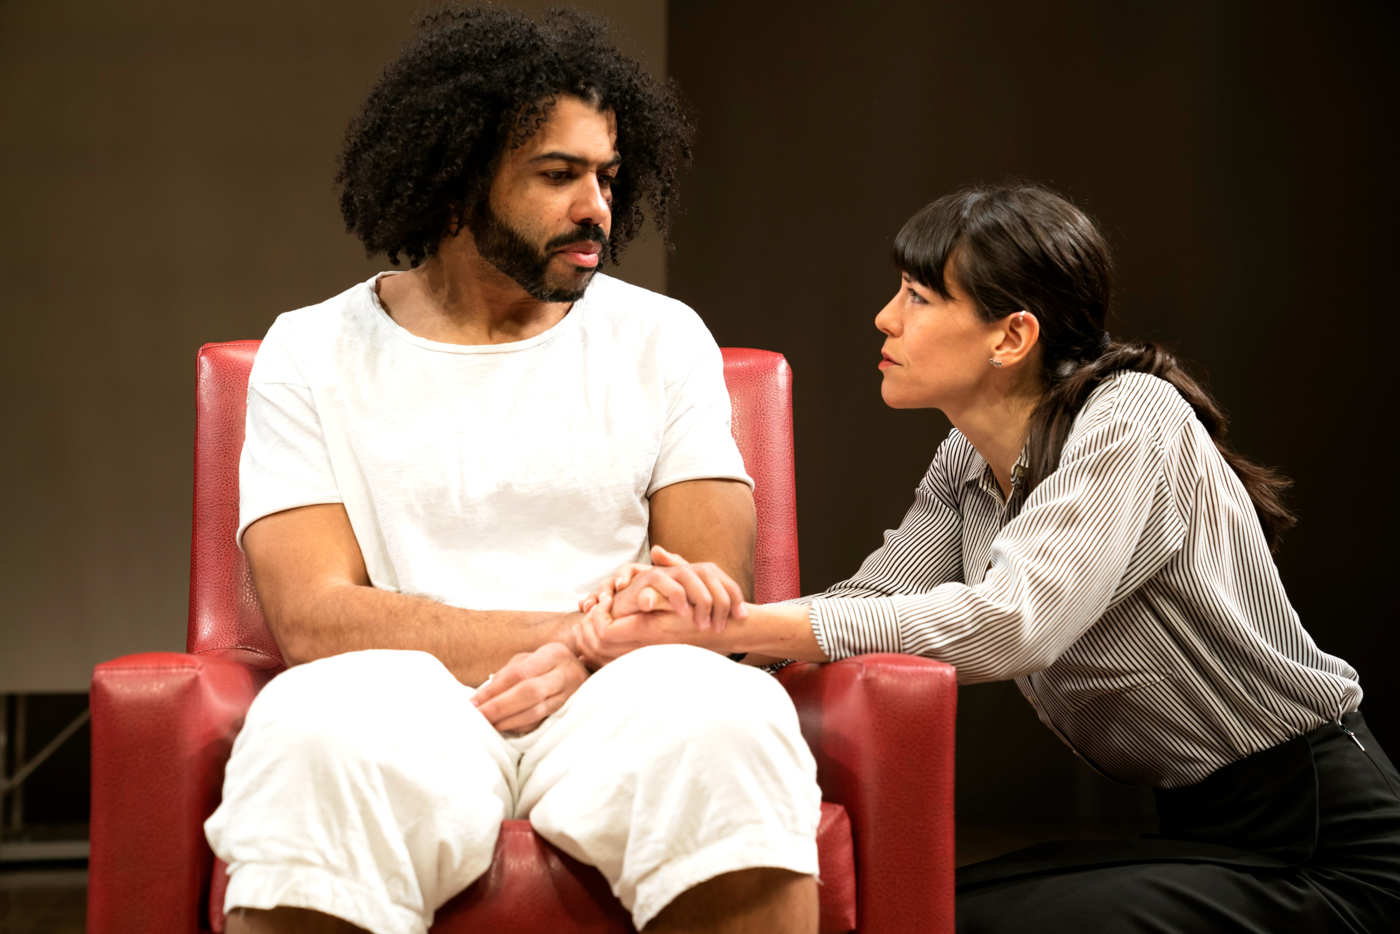 Daveed Diggs and Zoe Winters in Suzan-Lori Parks' "White Noise" at the Public Theater. Photo by Joan Marcus.